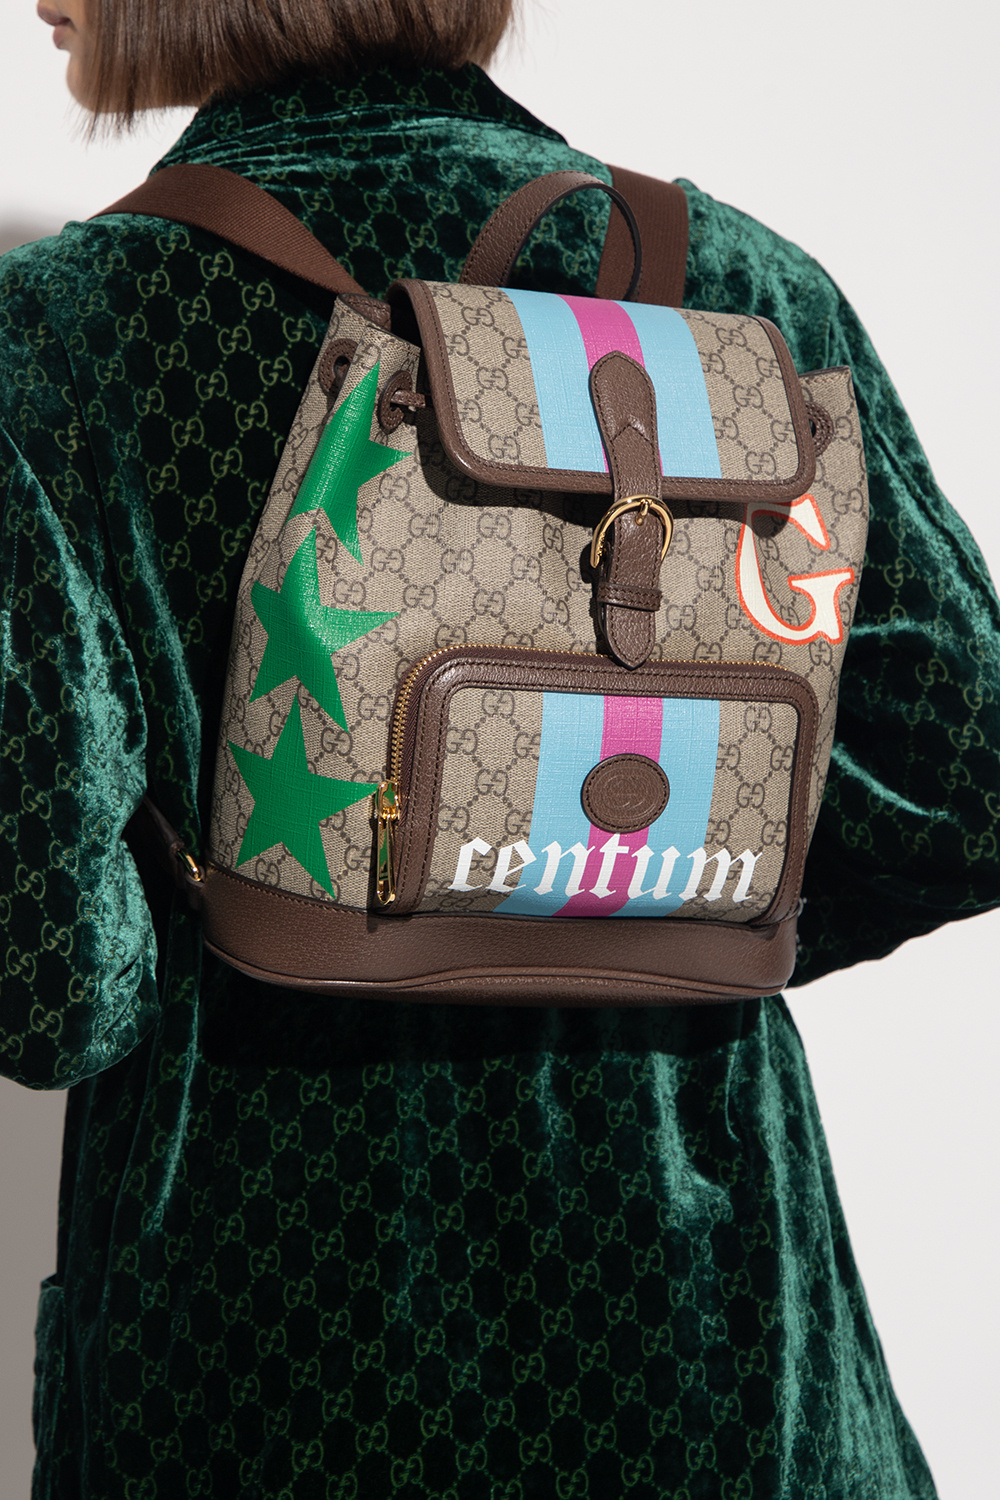 Gucci GG Supreme canvas backpack